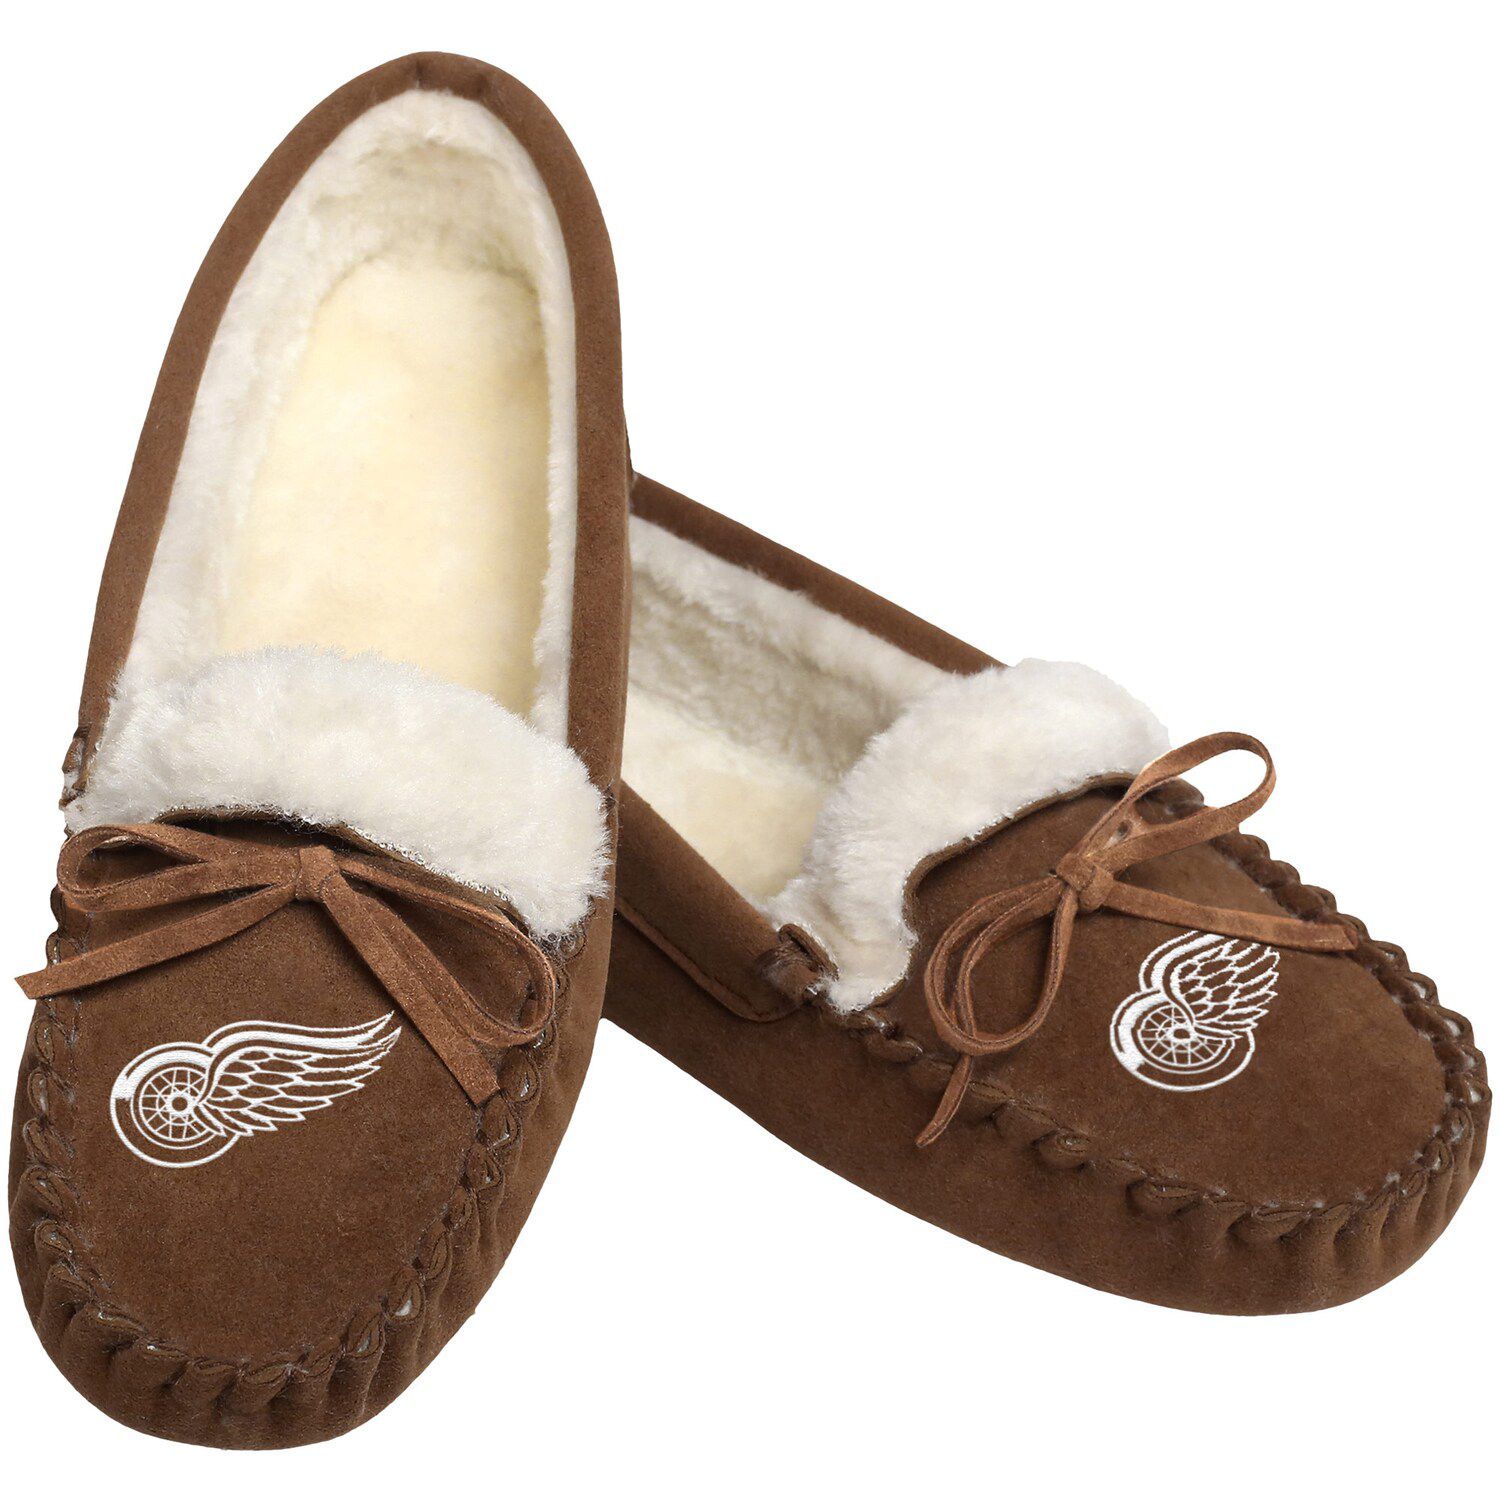 red wing moccasin slippers